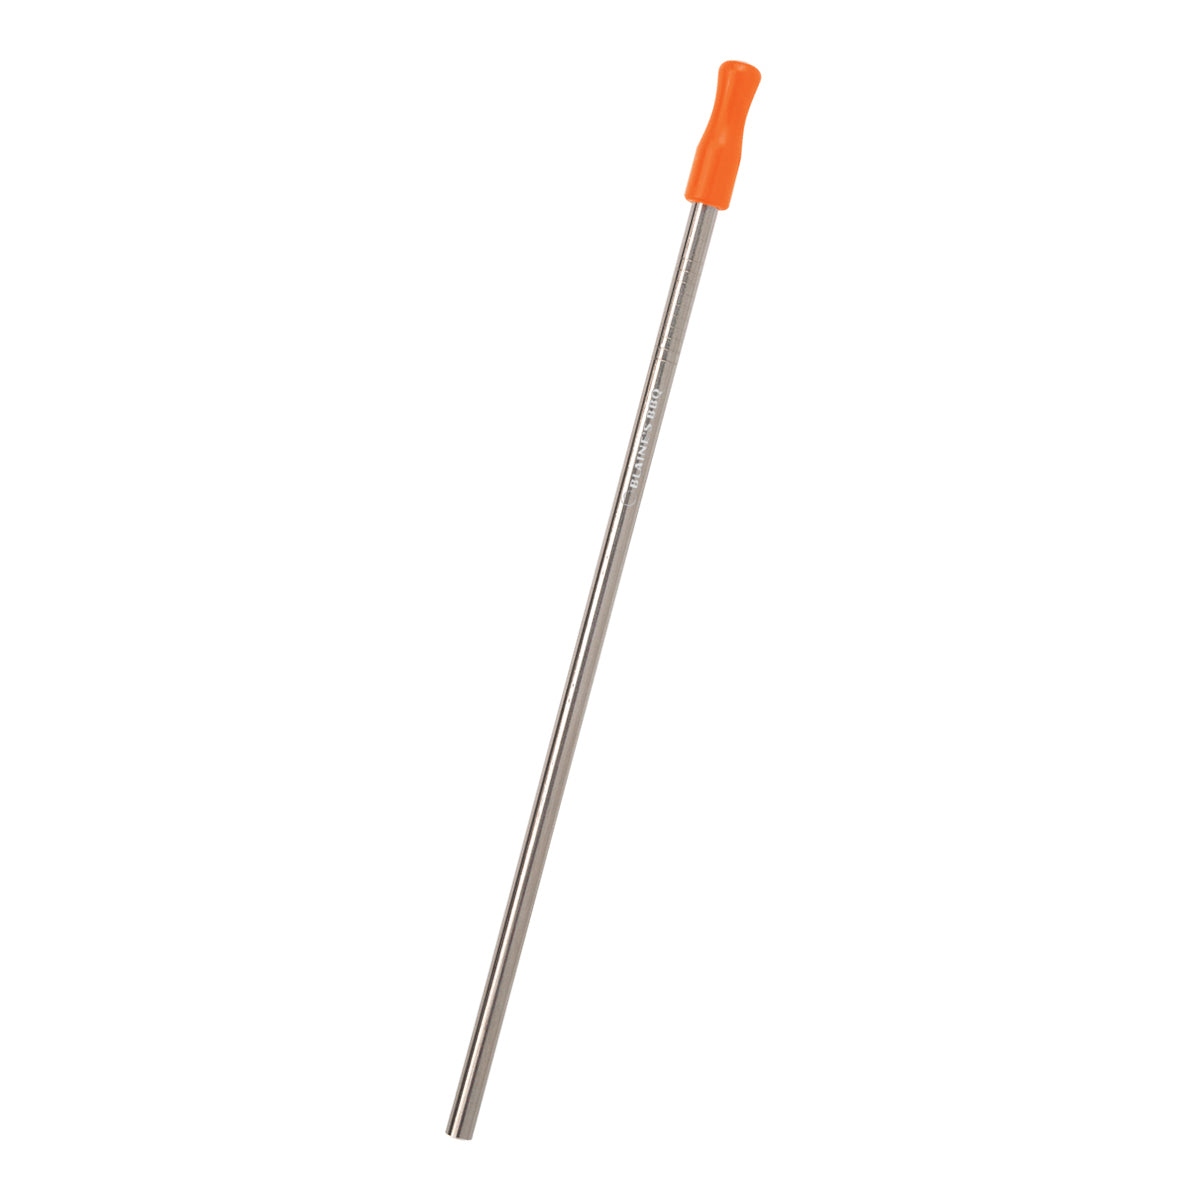 Customizable Stainless Steel Straw Kit with Cotton Pouch in orange.